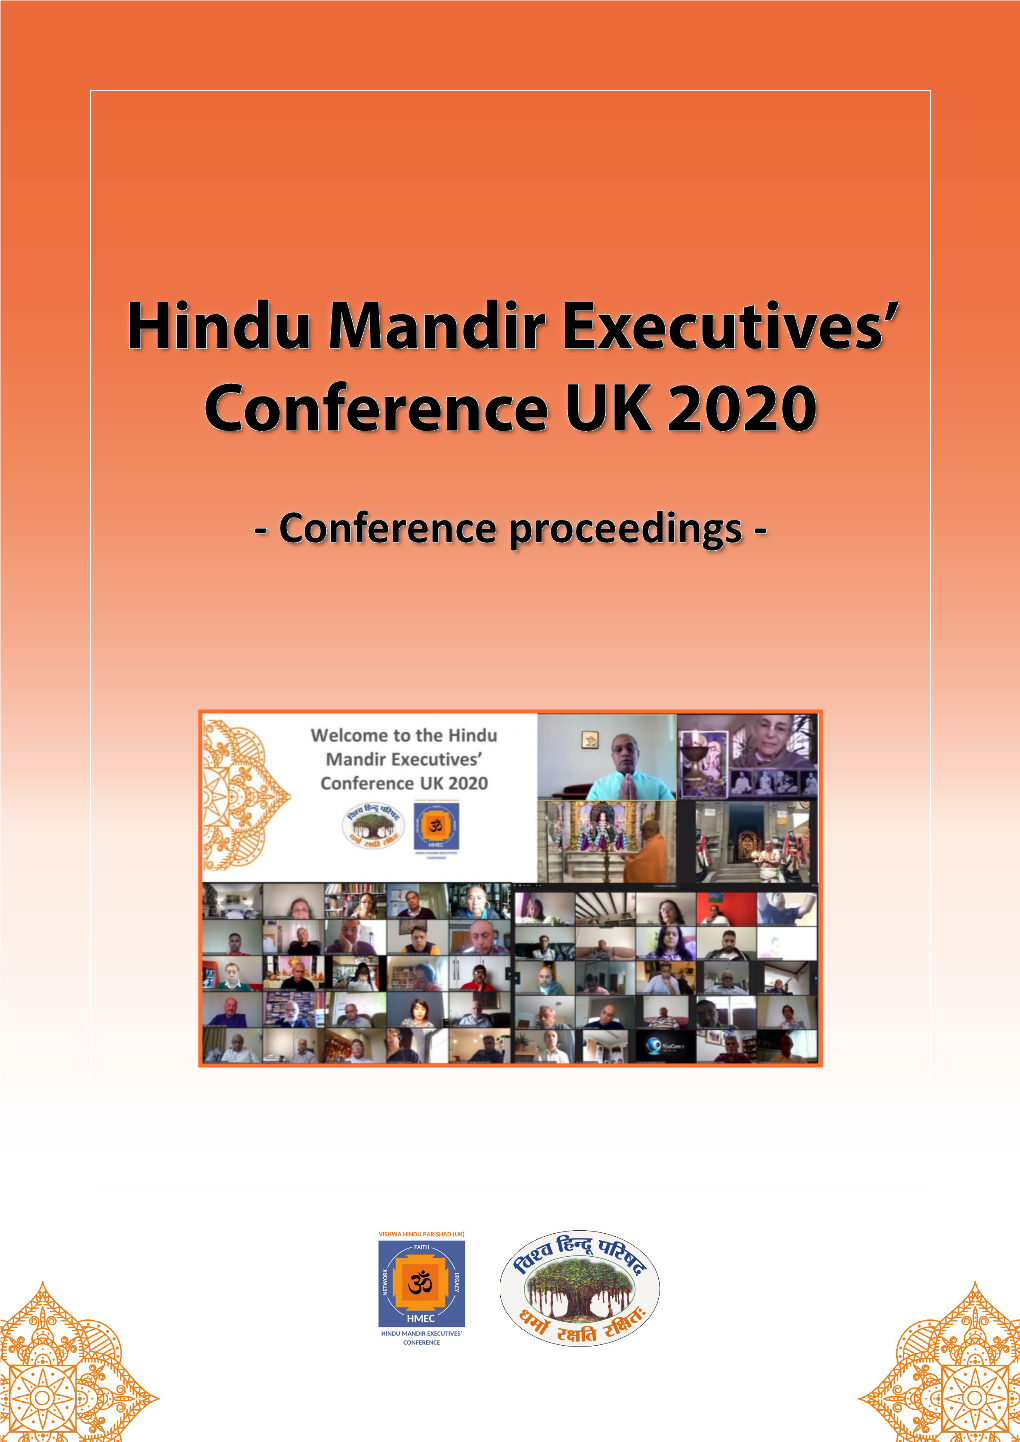 Download the Conference Proceedings